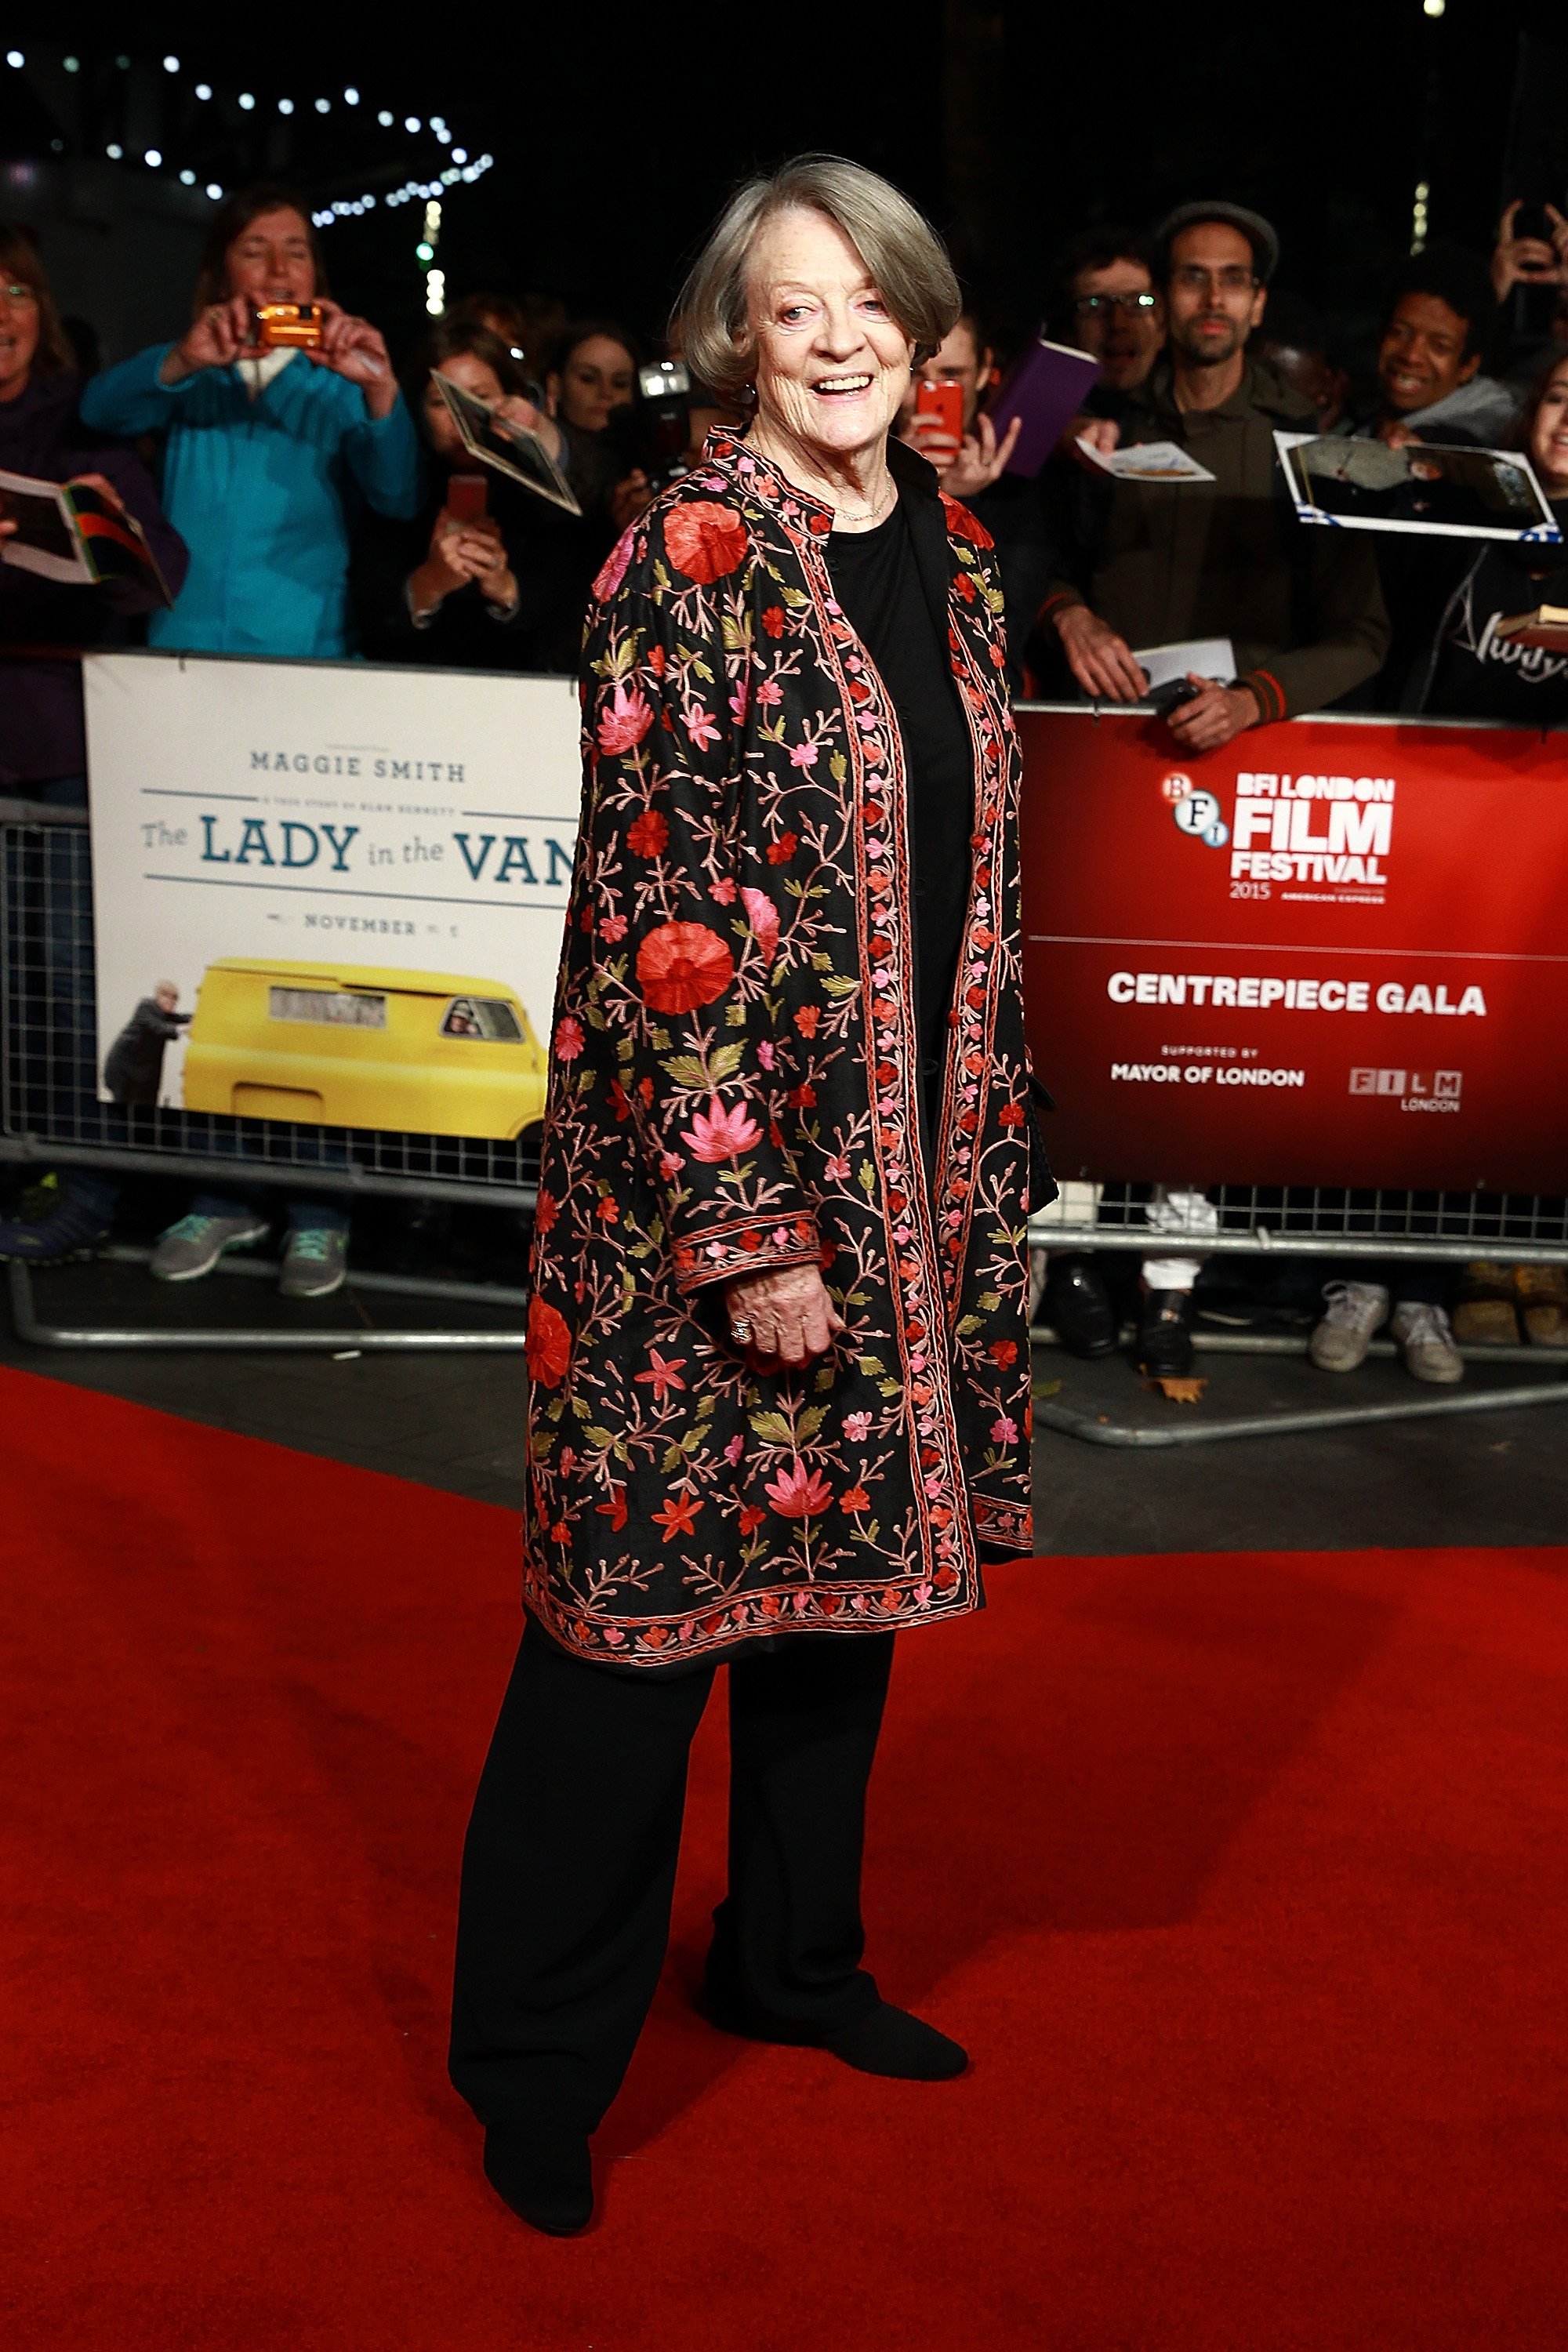 Maggie Smith at a screening of "The Lady in The Van" during the BFI London Film Festival at Odeon Leicester Square on October 13, 2015 | Photo: Getty Images